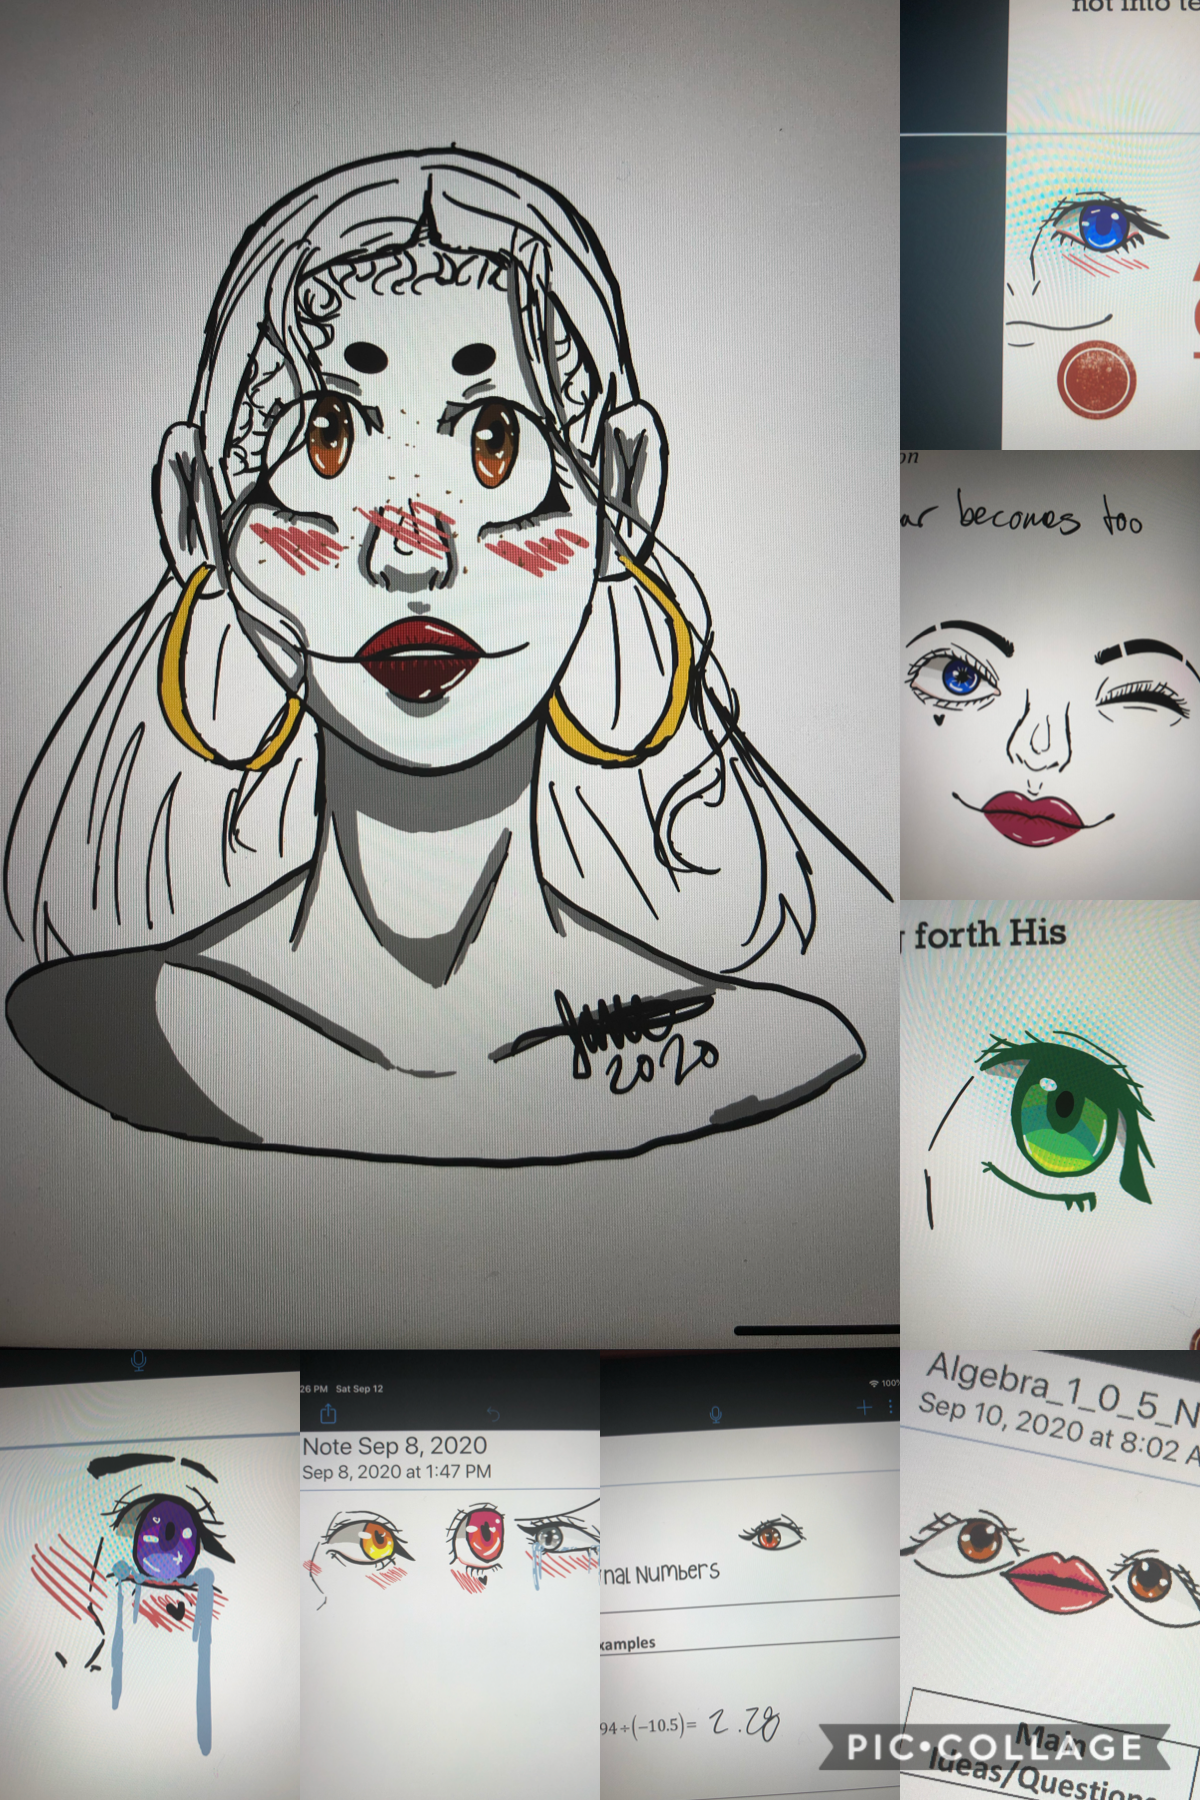 Some ✨gross✨ sketches I did in notability during school 